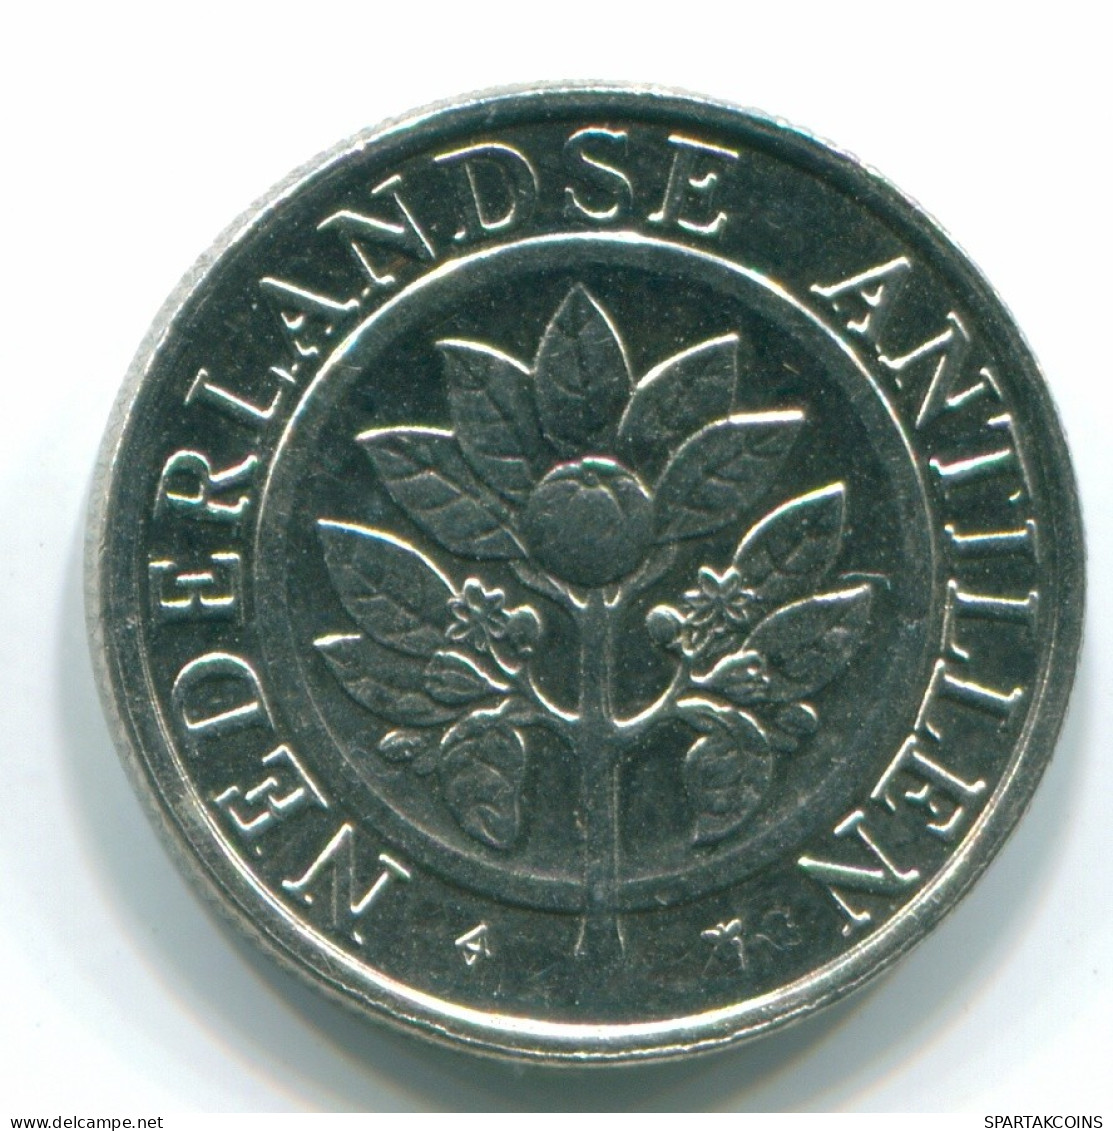 25 CENTS 1990 NETHERLANDS ANTILLES Nickel Colonial Coin #S11272.U.A - Antille Olandesi